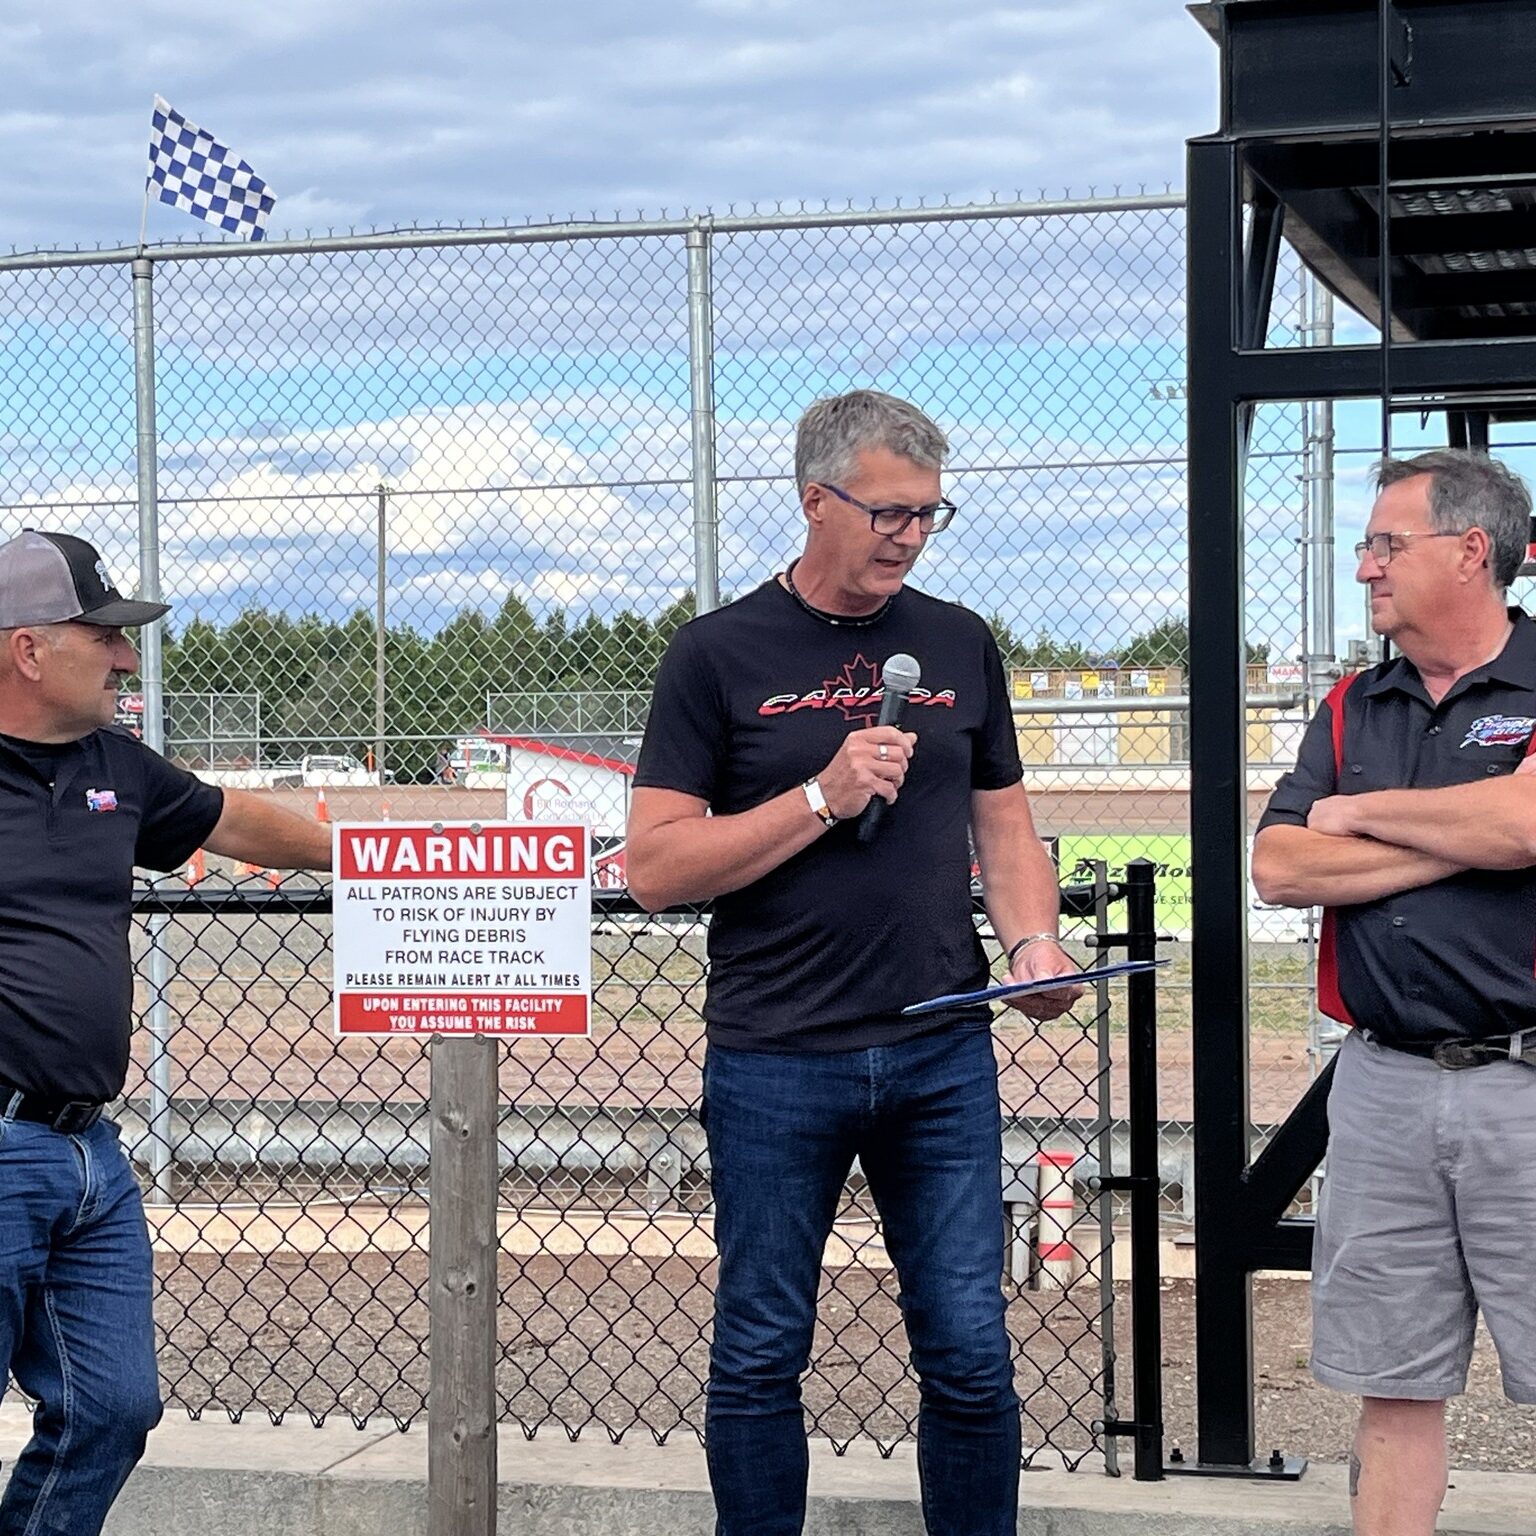 MPP Kevin Holland at Thunder Valley Speedway, announcing NOHFC funding. The setting of the speedway adds an energetic and community-focused atmosphere to the announcement, reflecting the excitement and potential impact of this new investment.